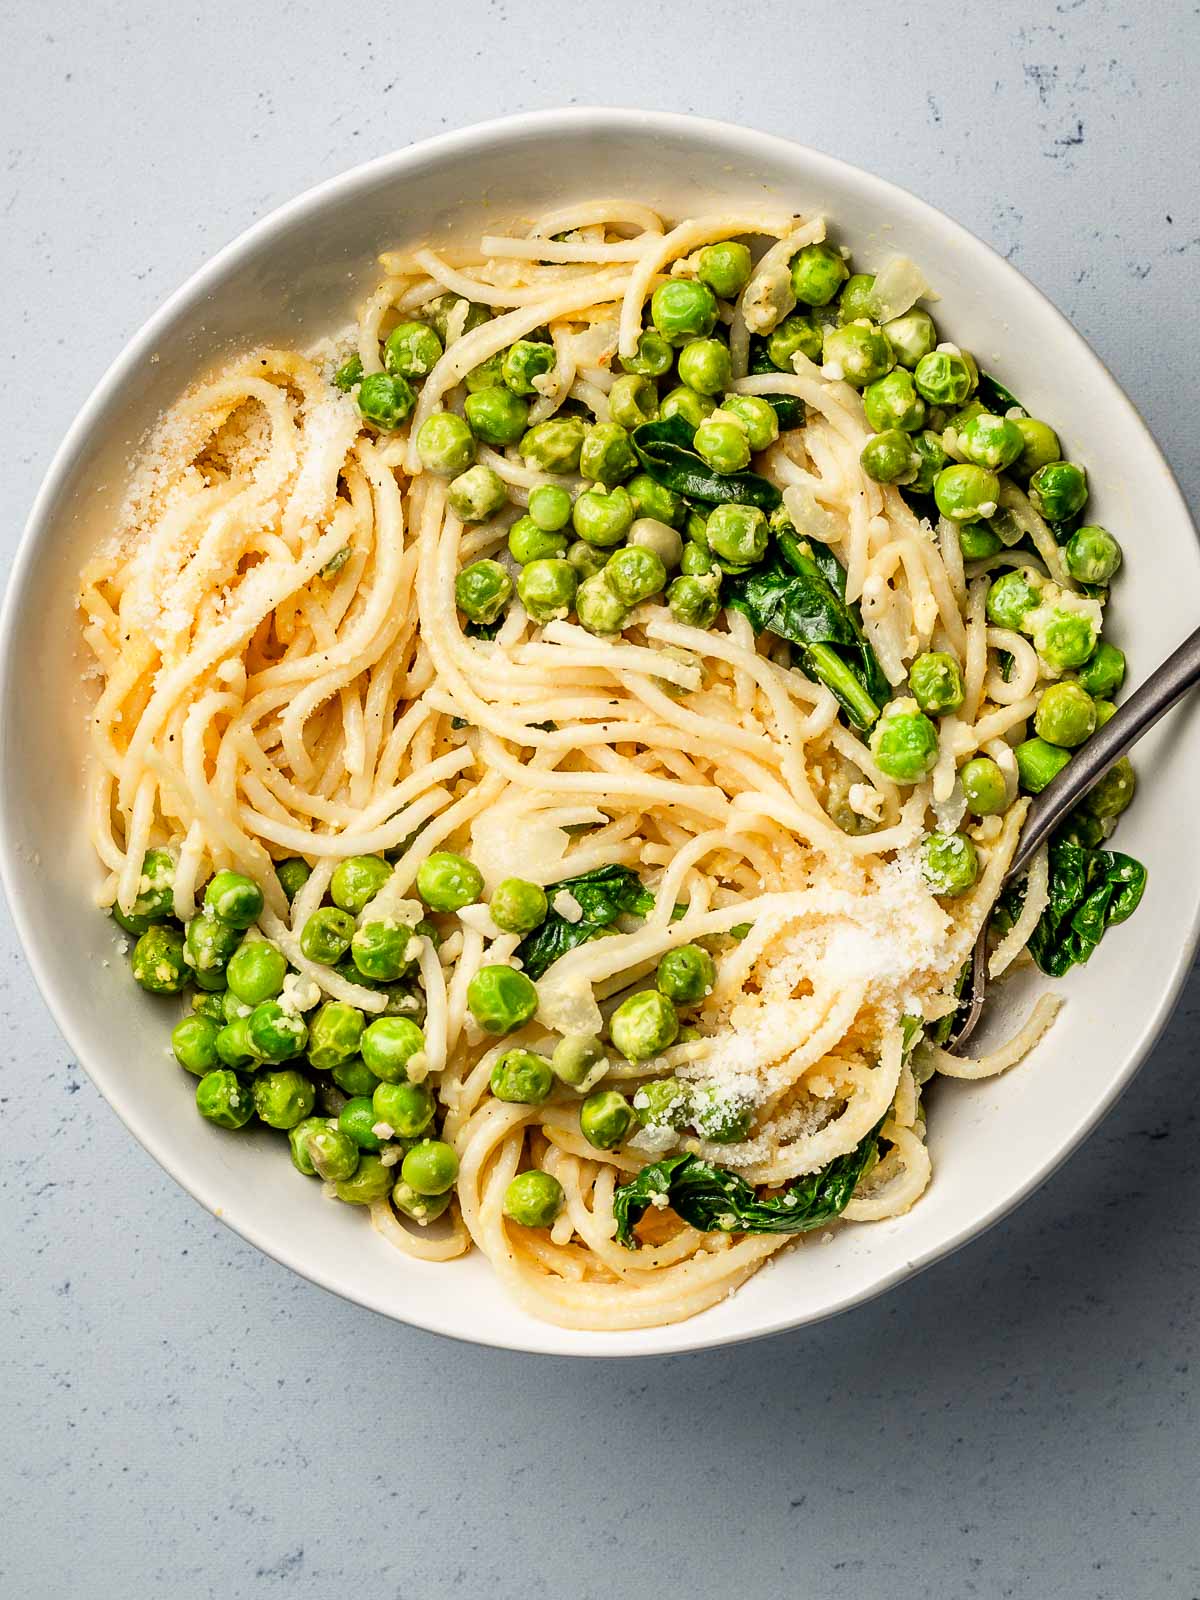 Pasta with peas parmesan lemon and spinach in a bowl.